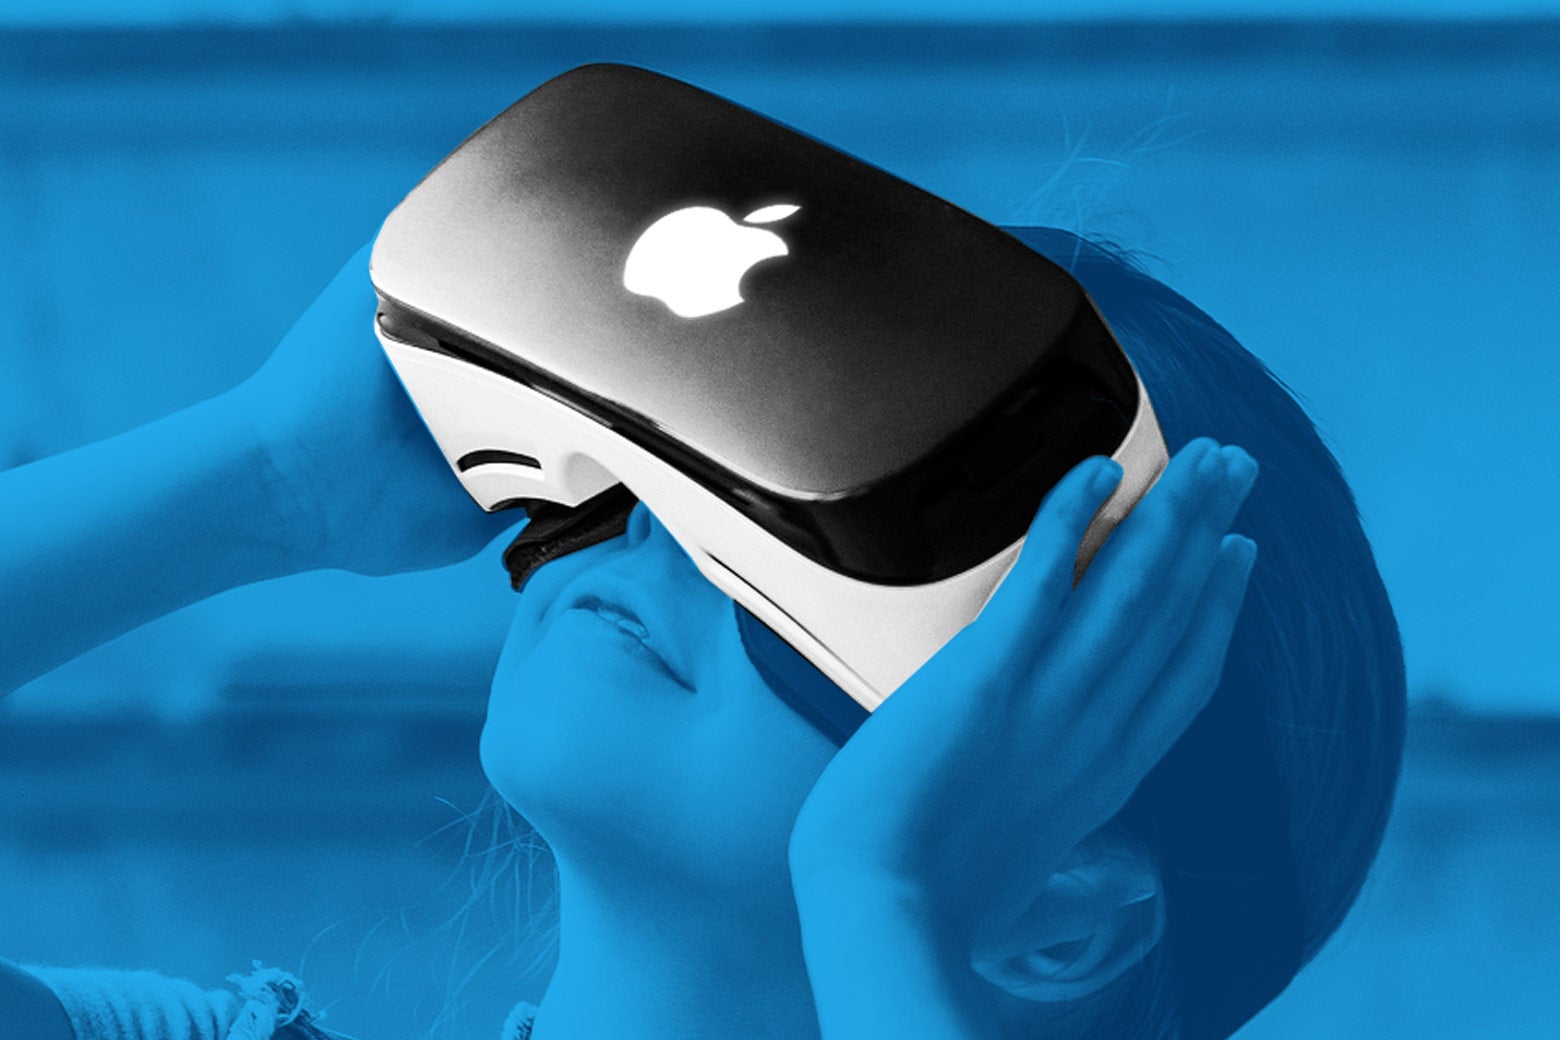 A VR headset with an Apple logo.